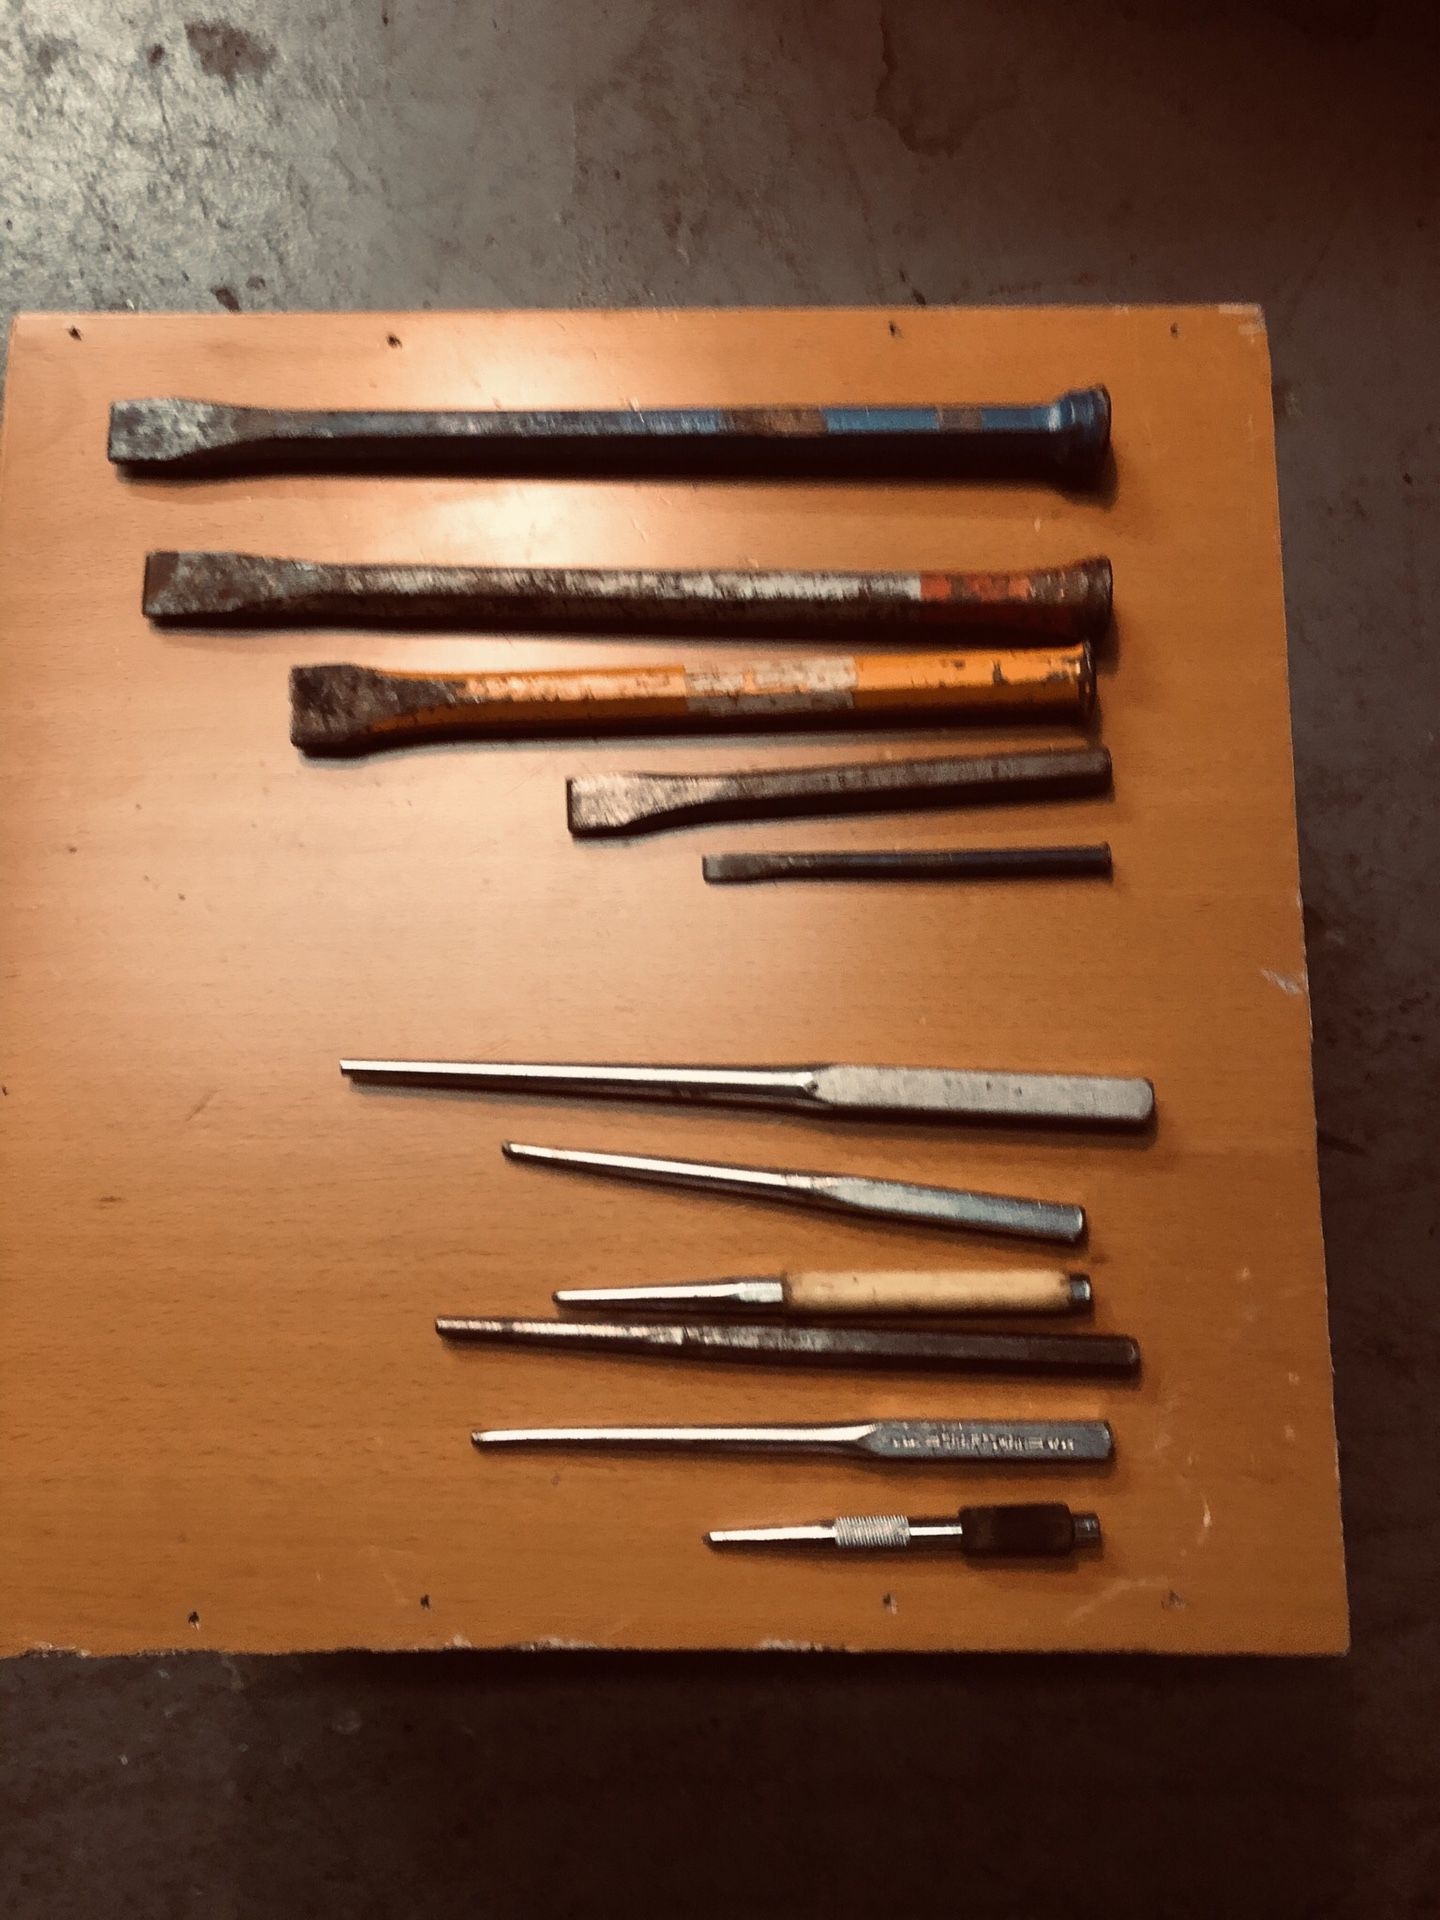 Chisel and punch chisel